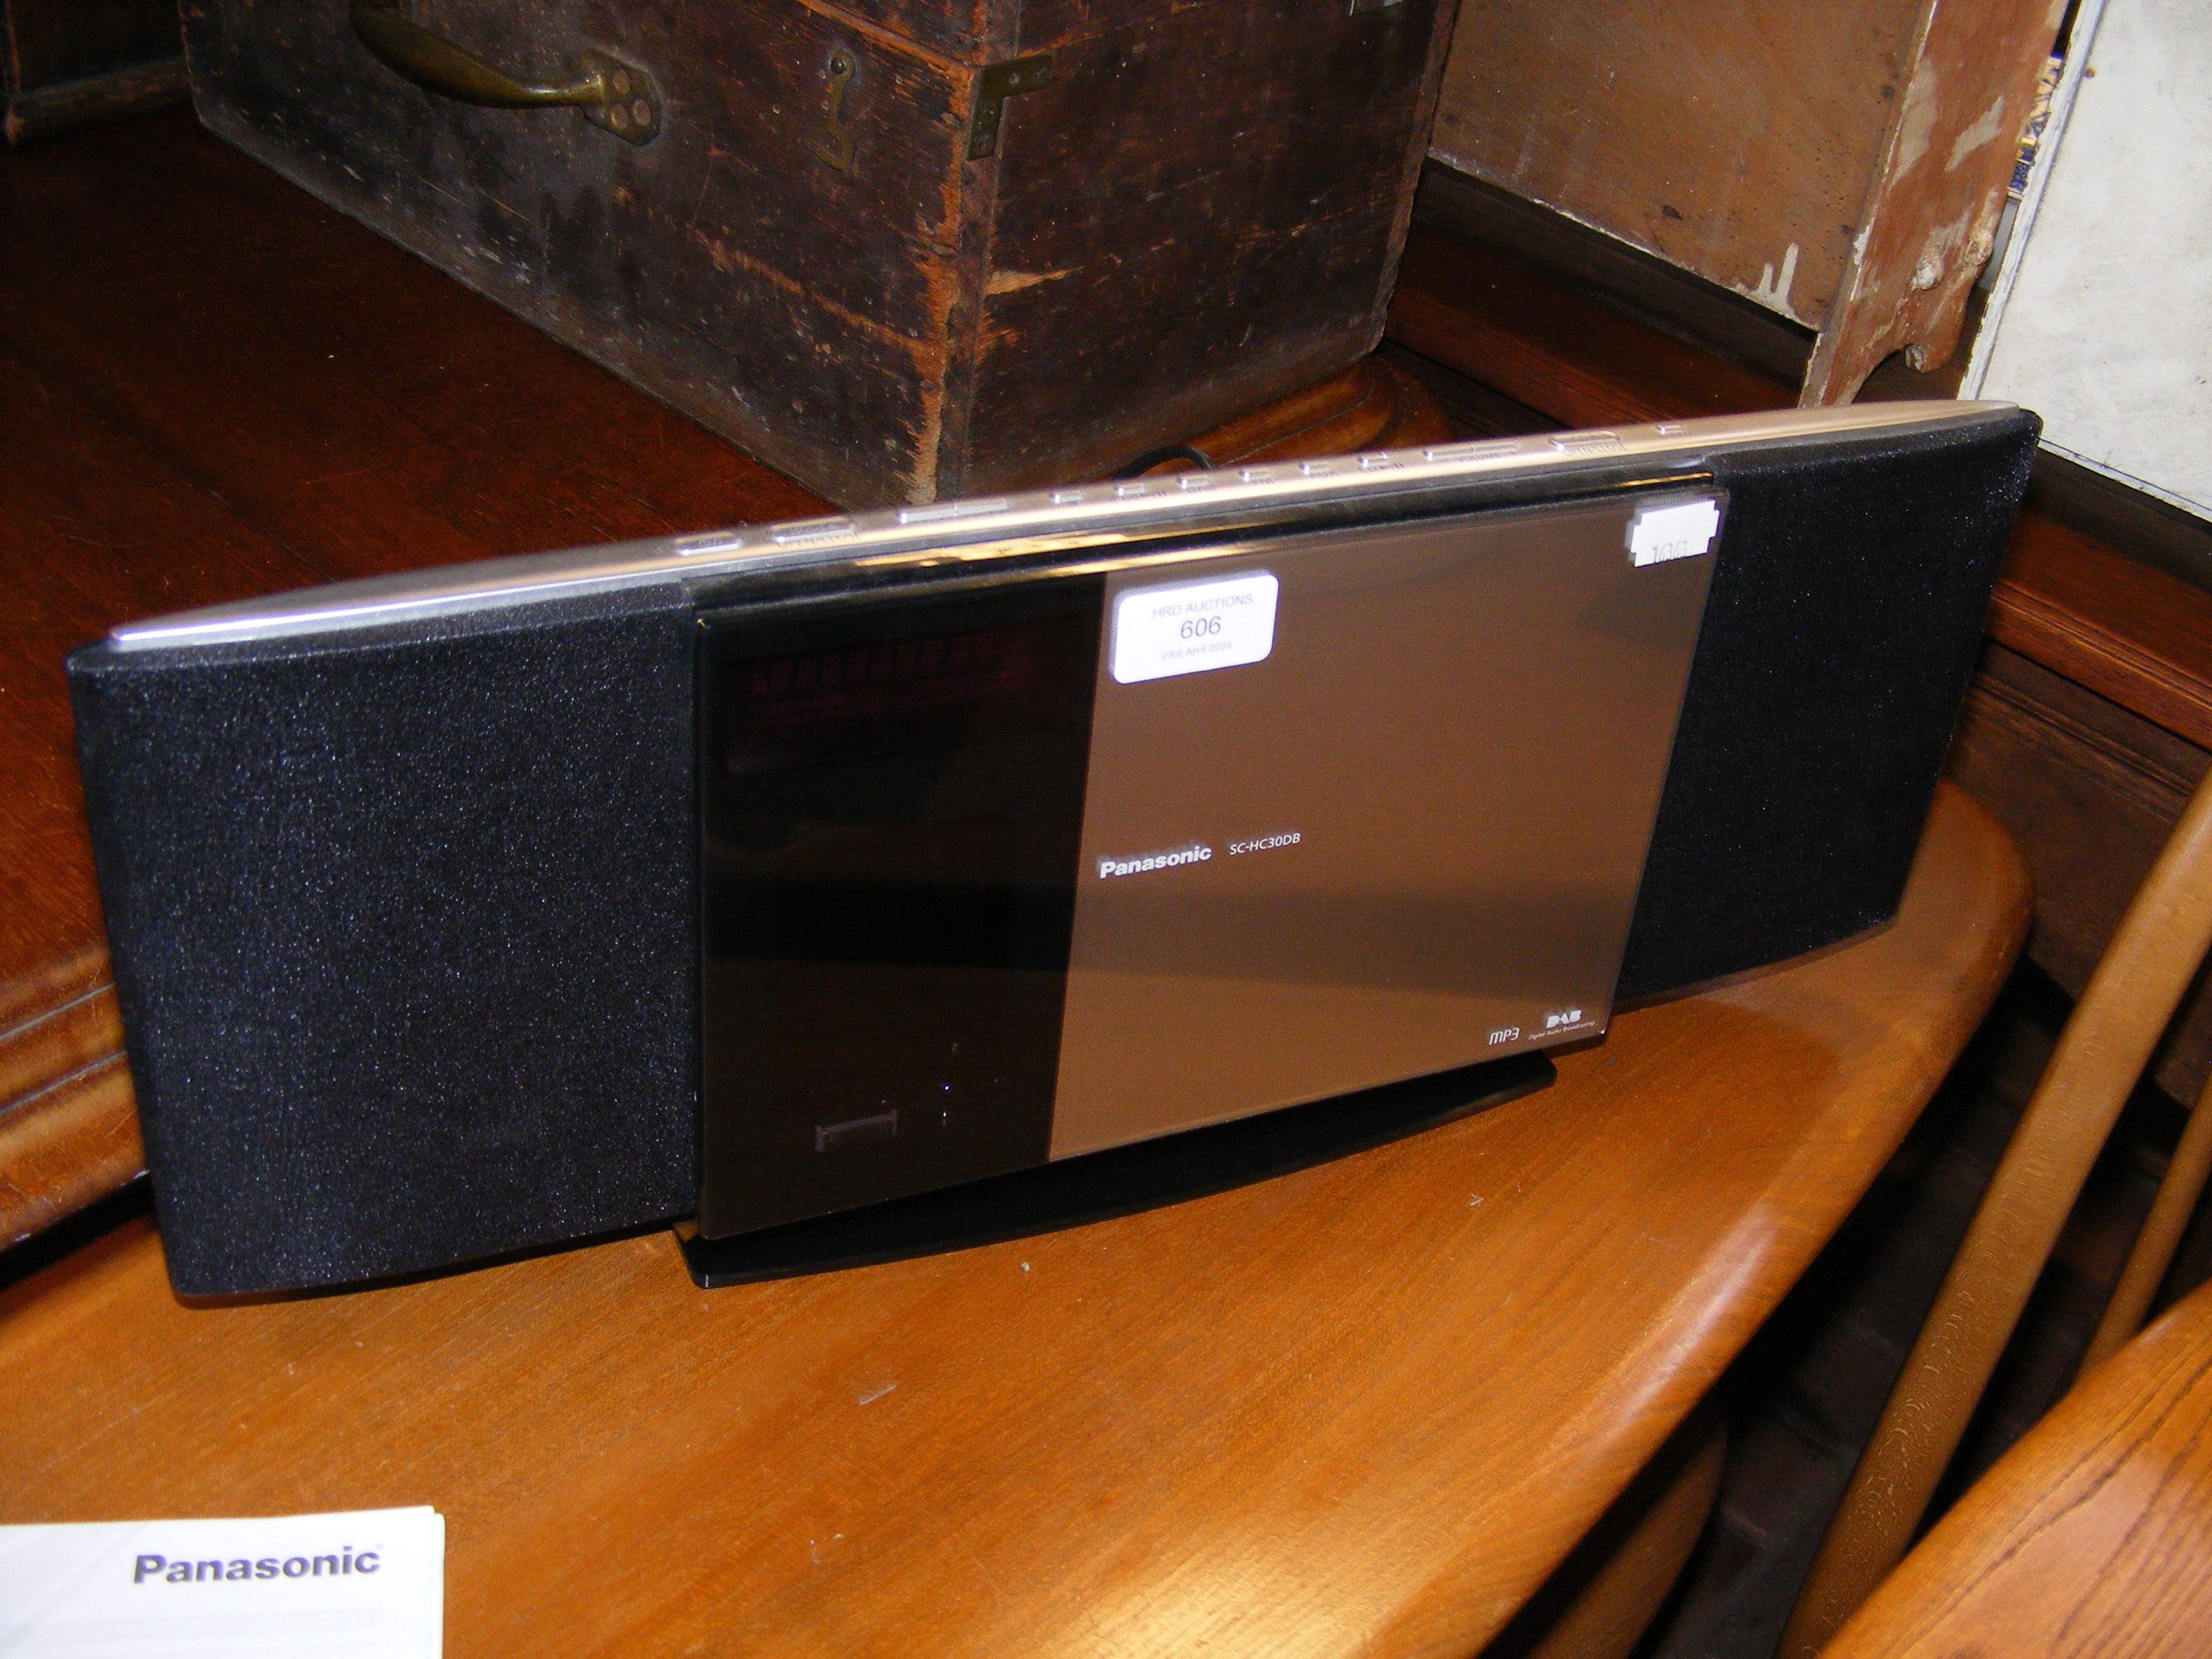 A Panasonic SC-HC30DB Compact Stereo System with o